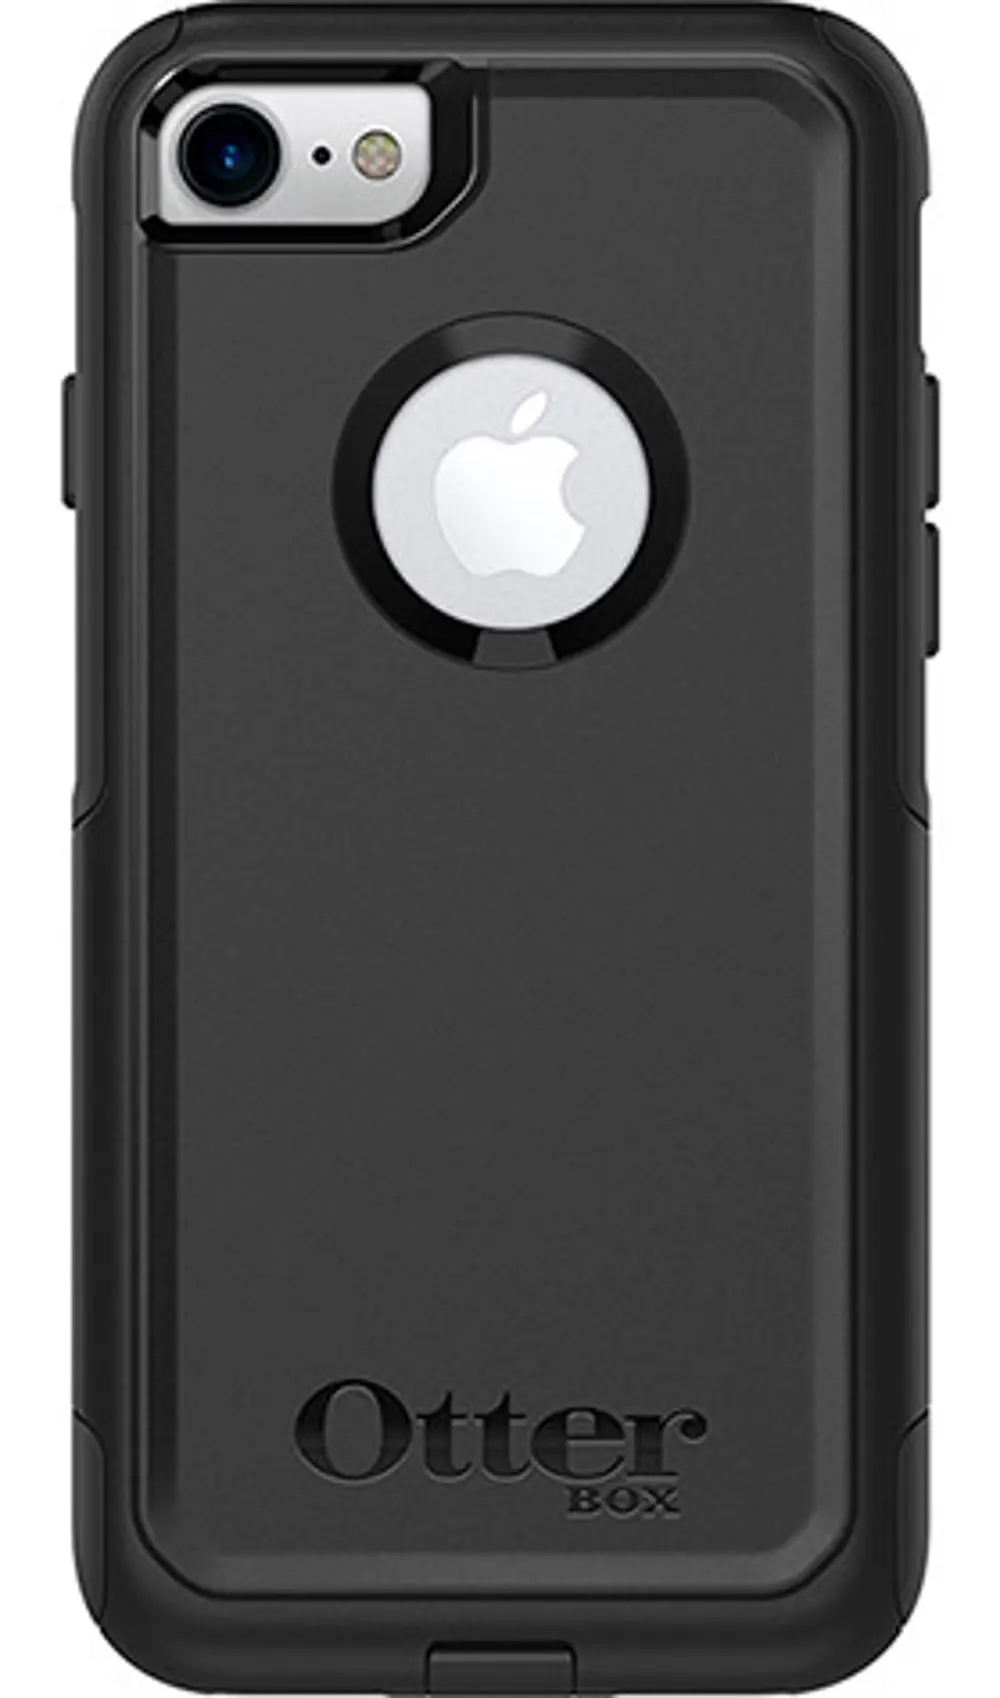 77-53897 OtterBox Commuter Series Case for iPhone 7 and iPhone 8 - Black-1